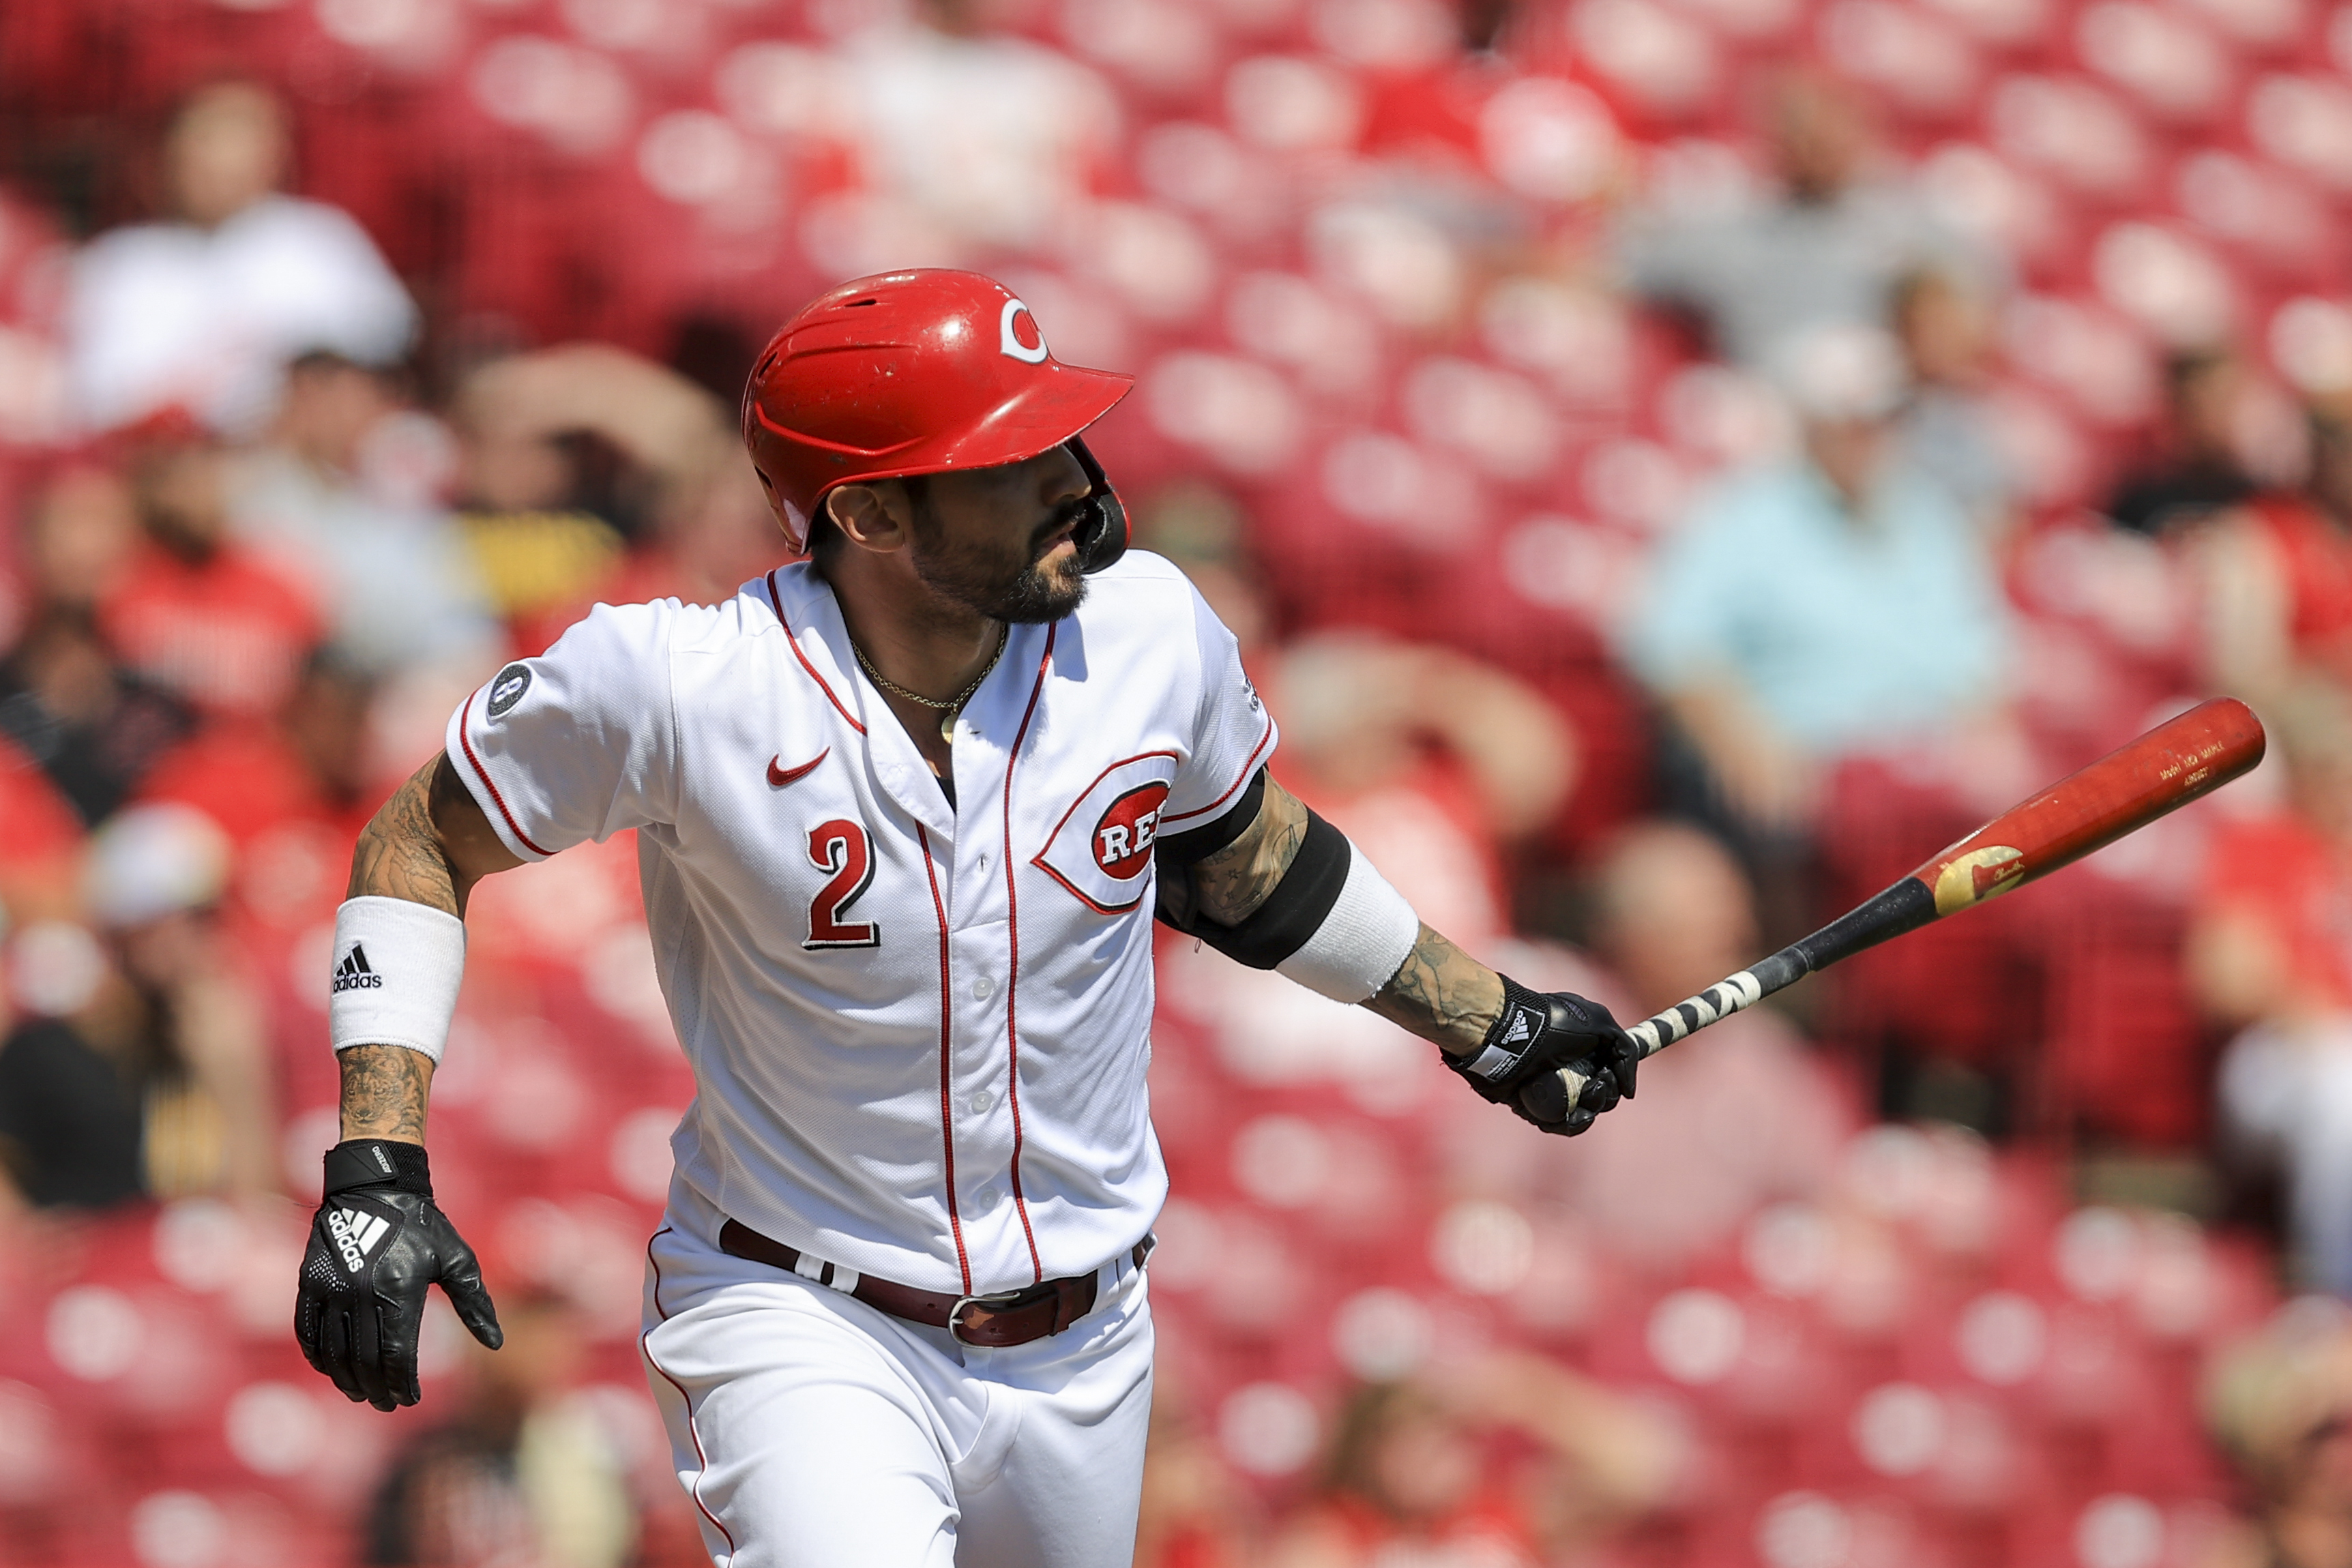 The offseason move that made Nick Castellanos trust, sign with Phillies